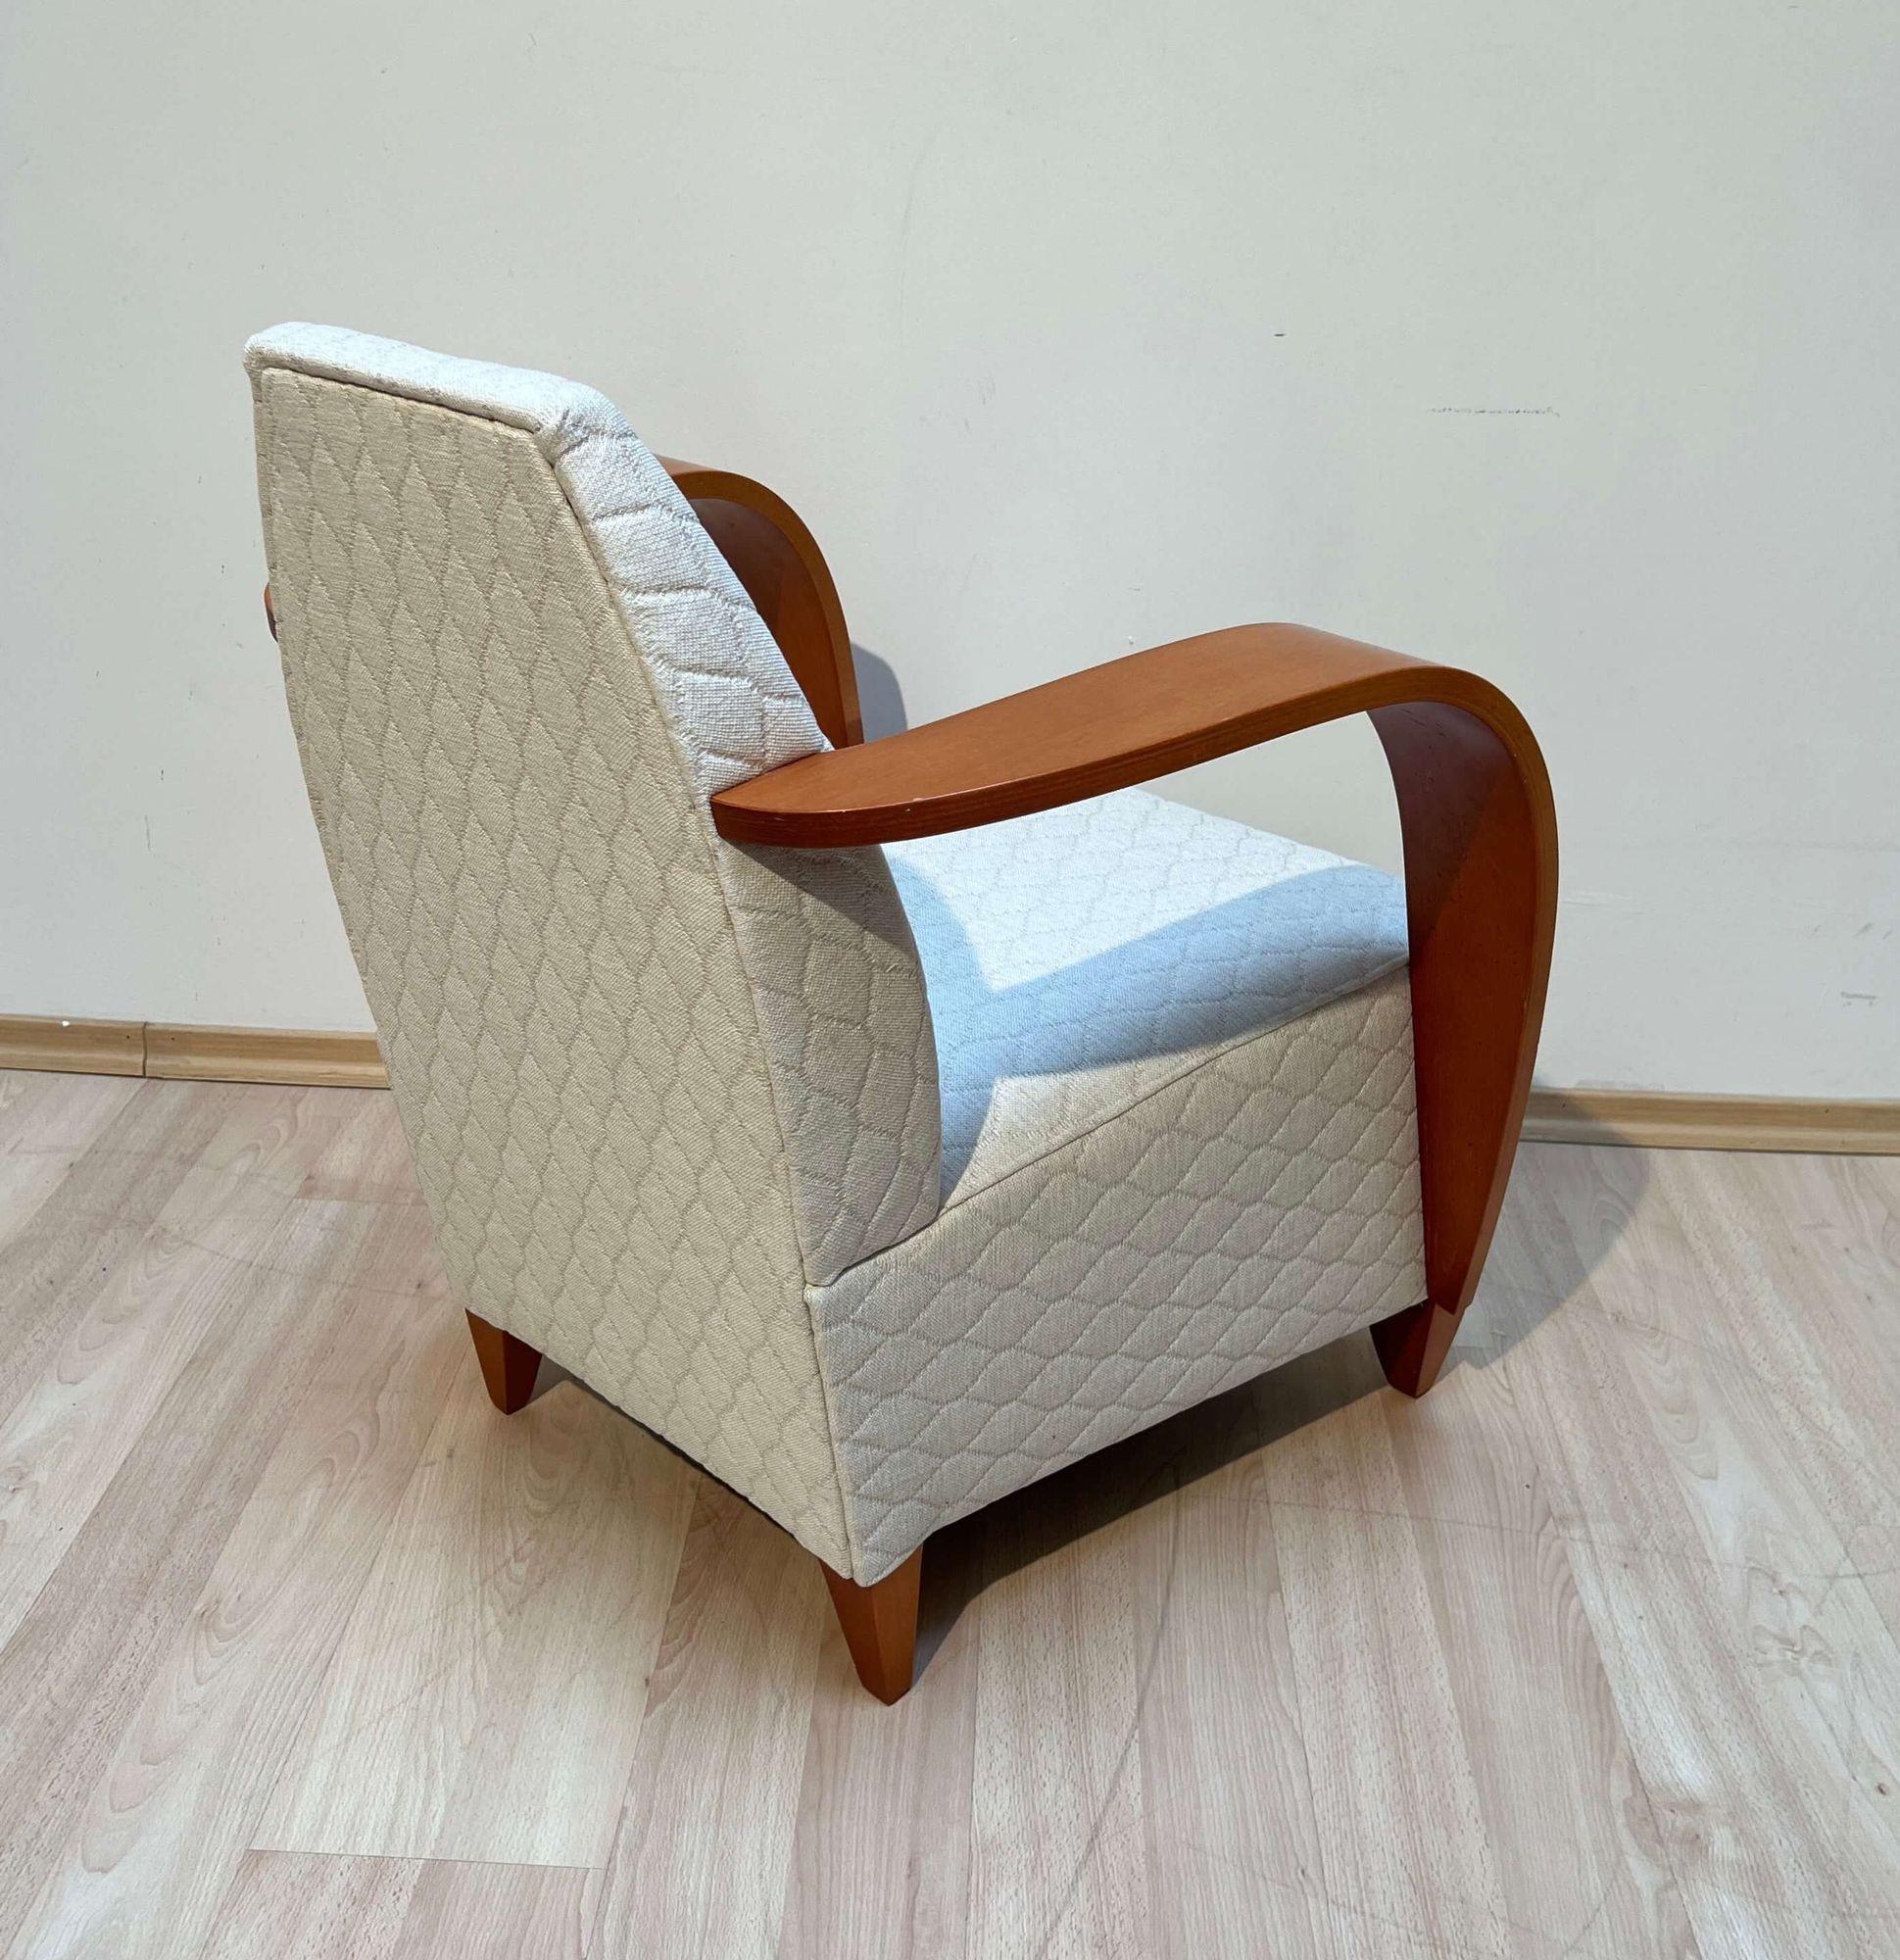 Design Arm Chair, Beech Wood, Cream-white Quilt Fabric, Spain, 1990s For Sale 1